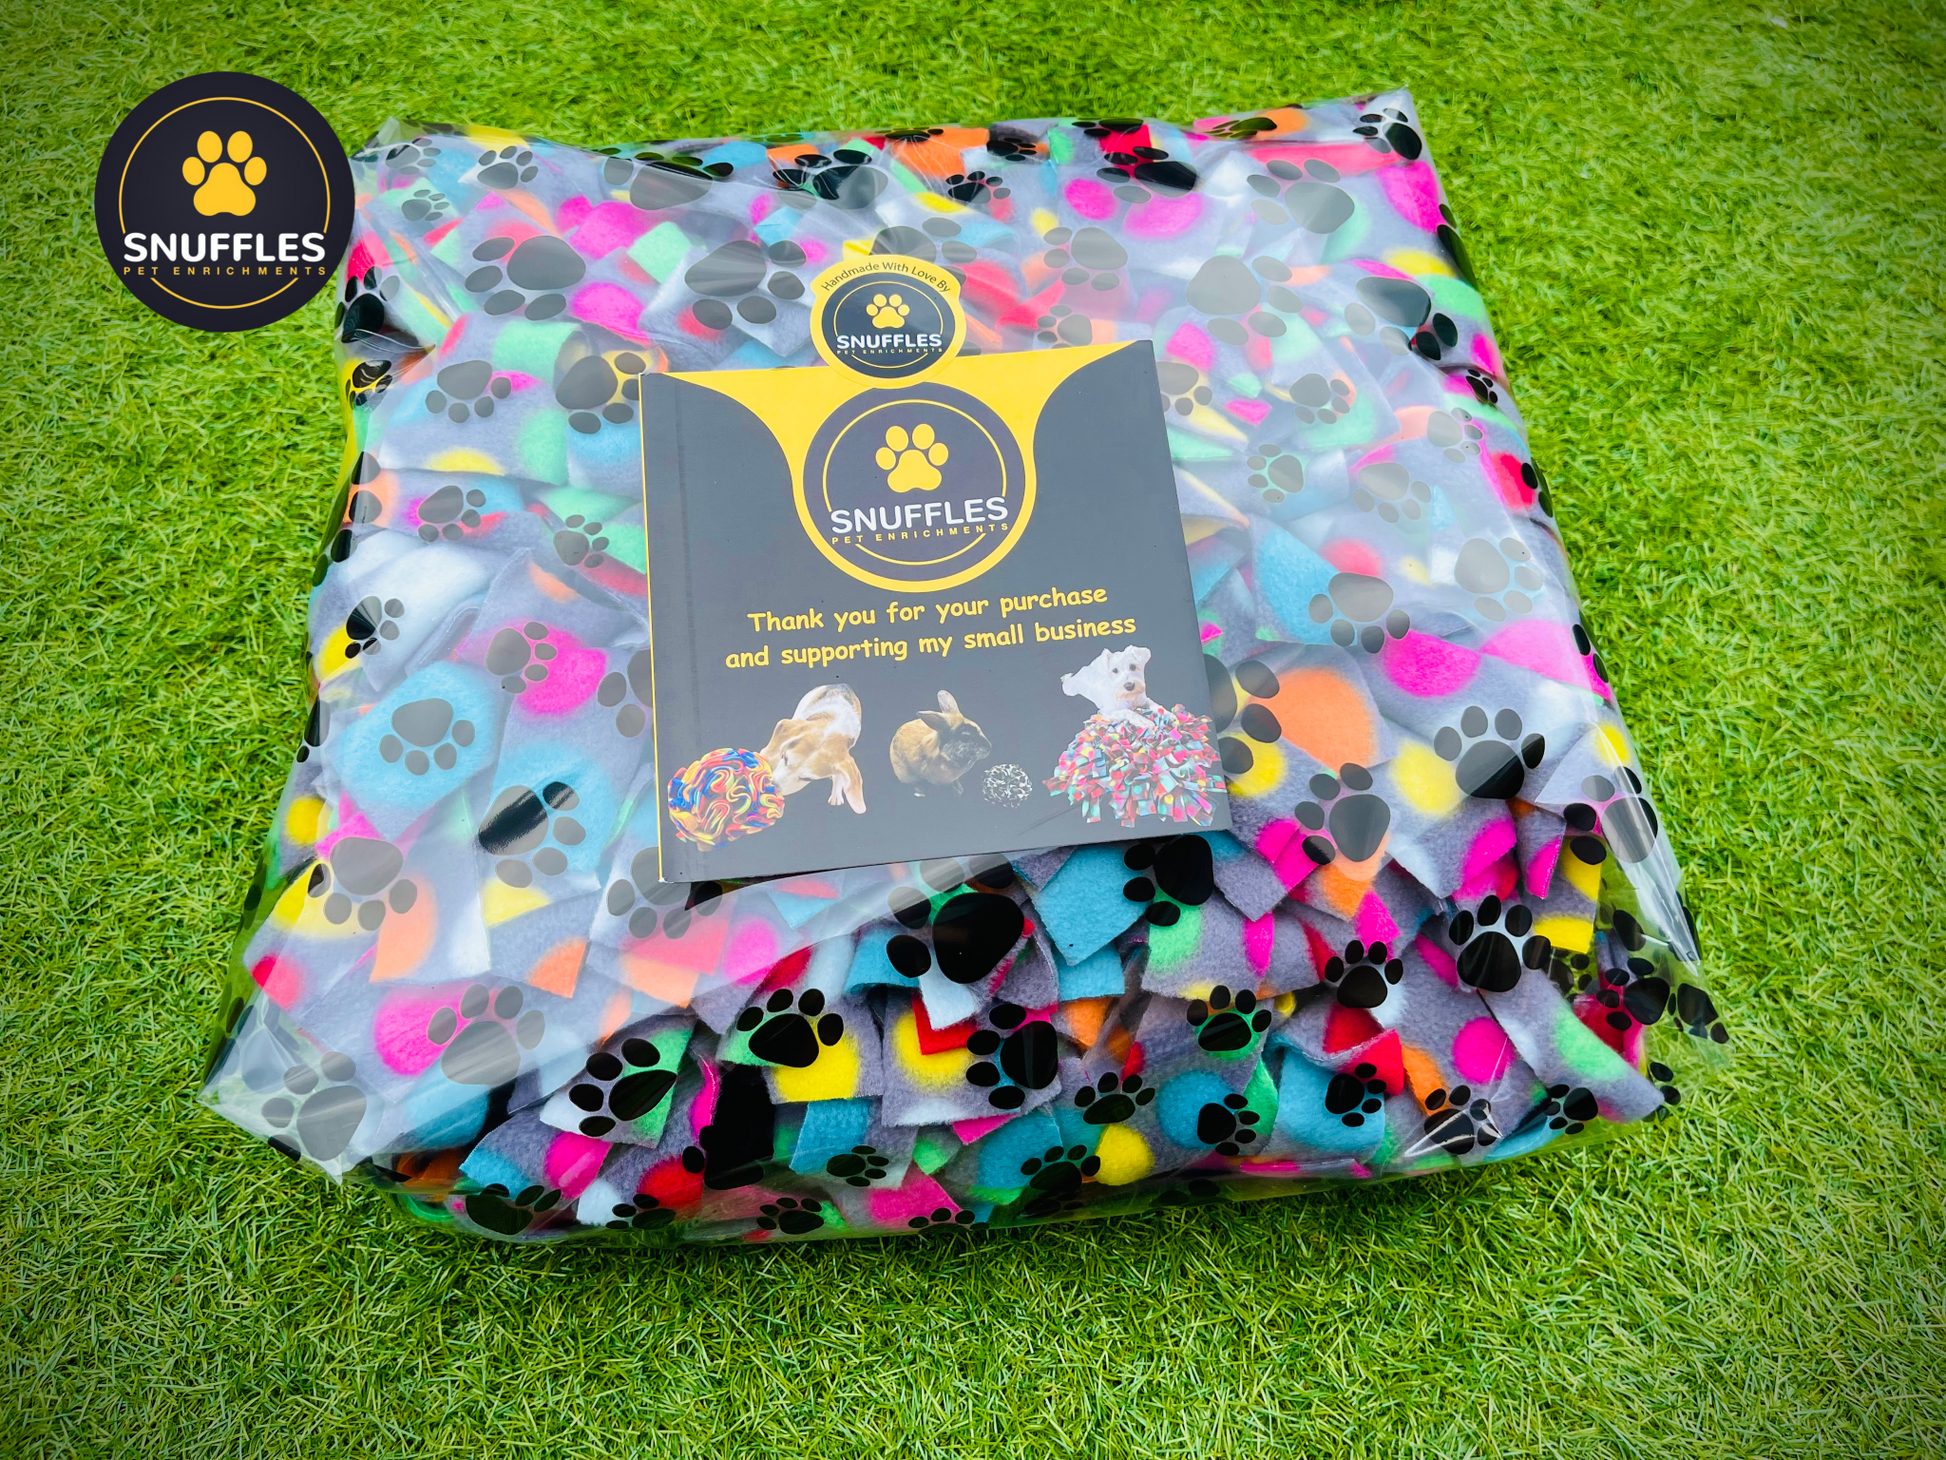 Large Snuffle Mat Wrapped With Recycled Packaging